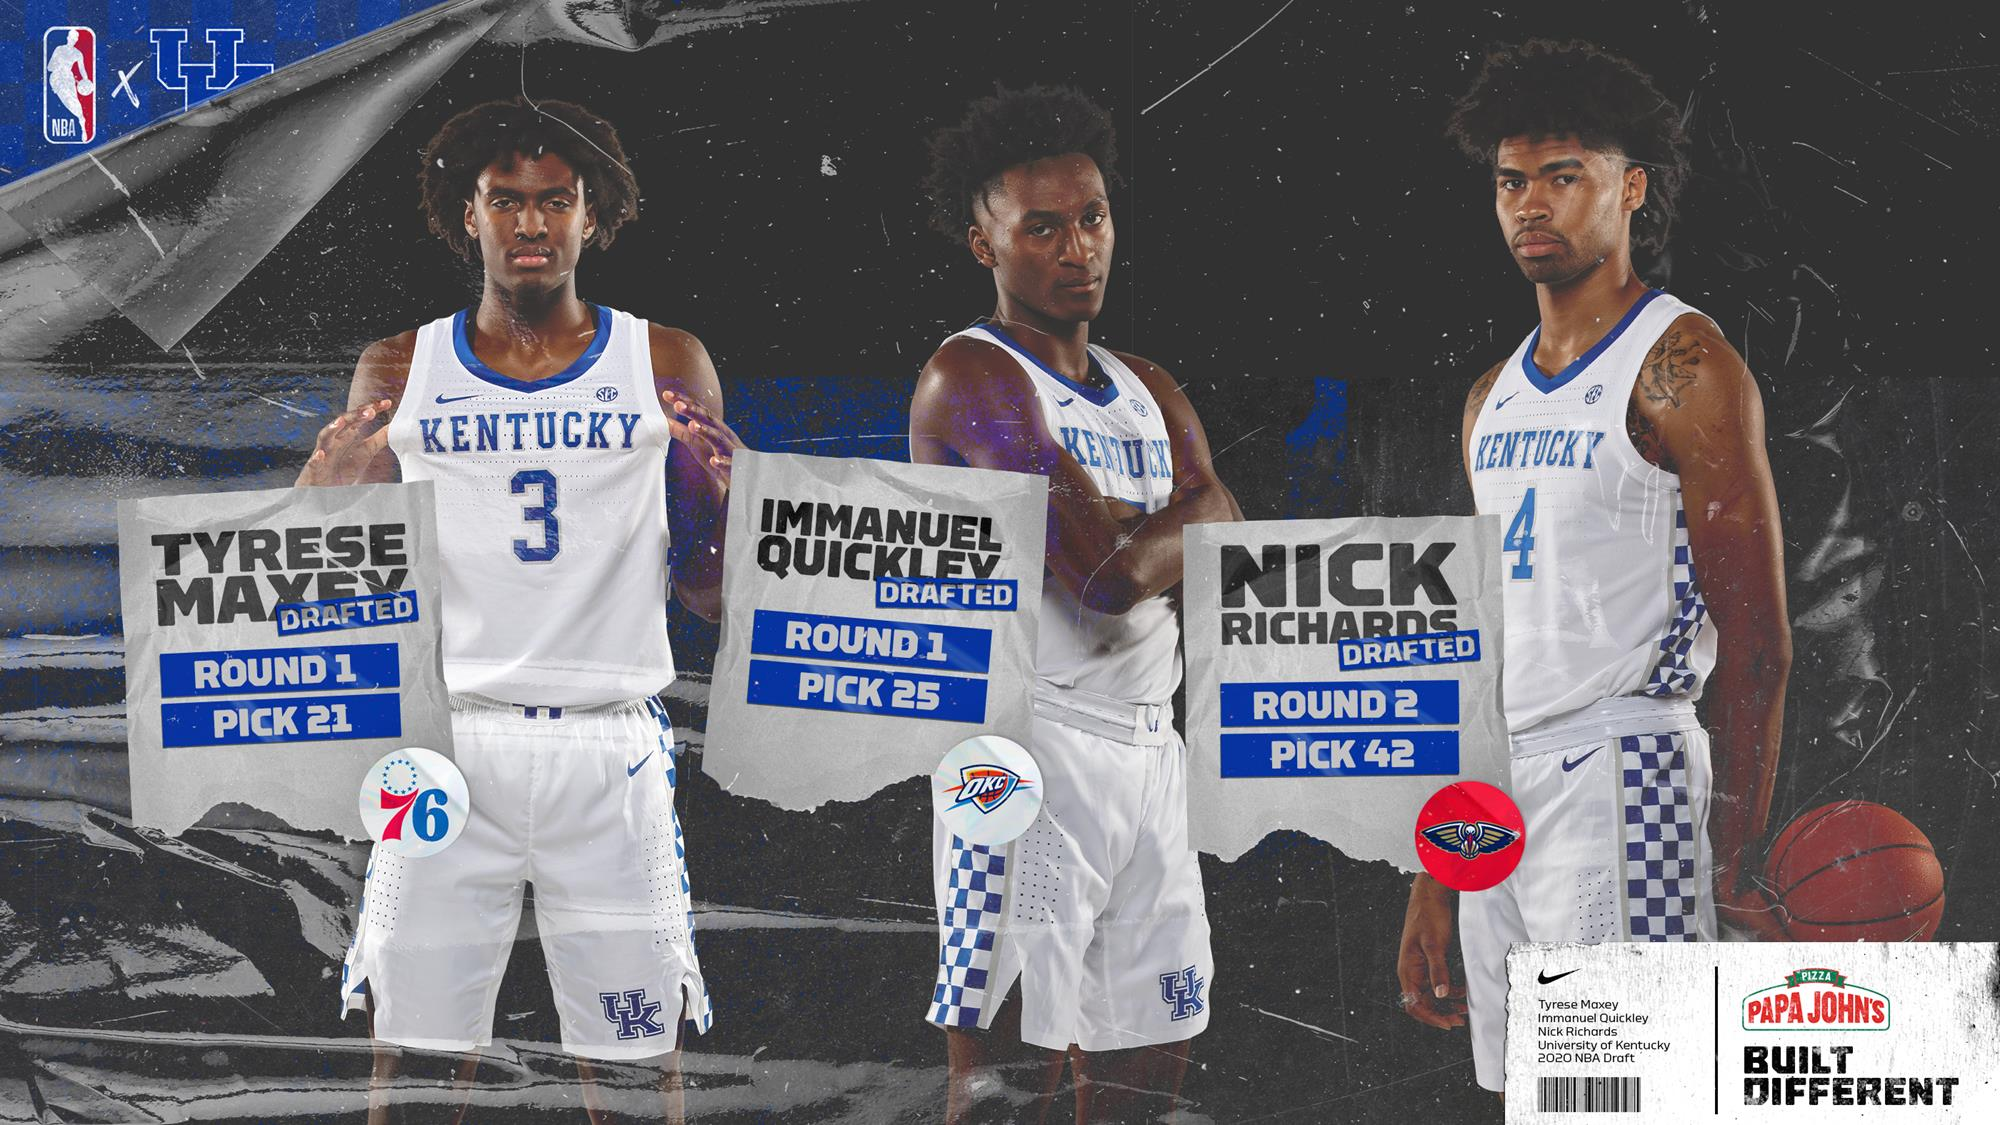 Three Wildcats Selected in the 2020 NBA Draft